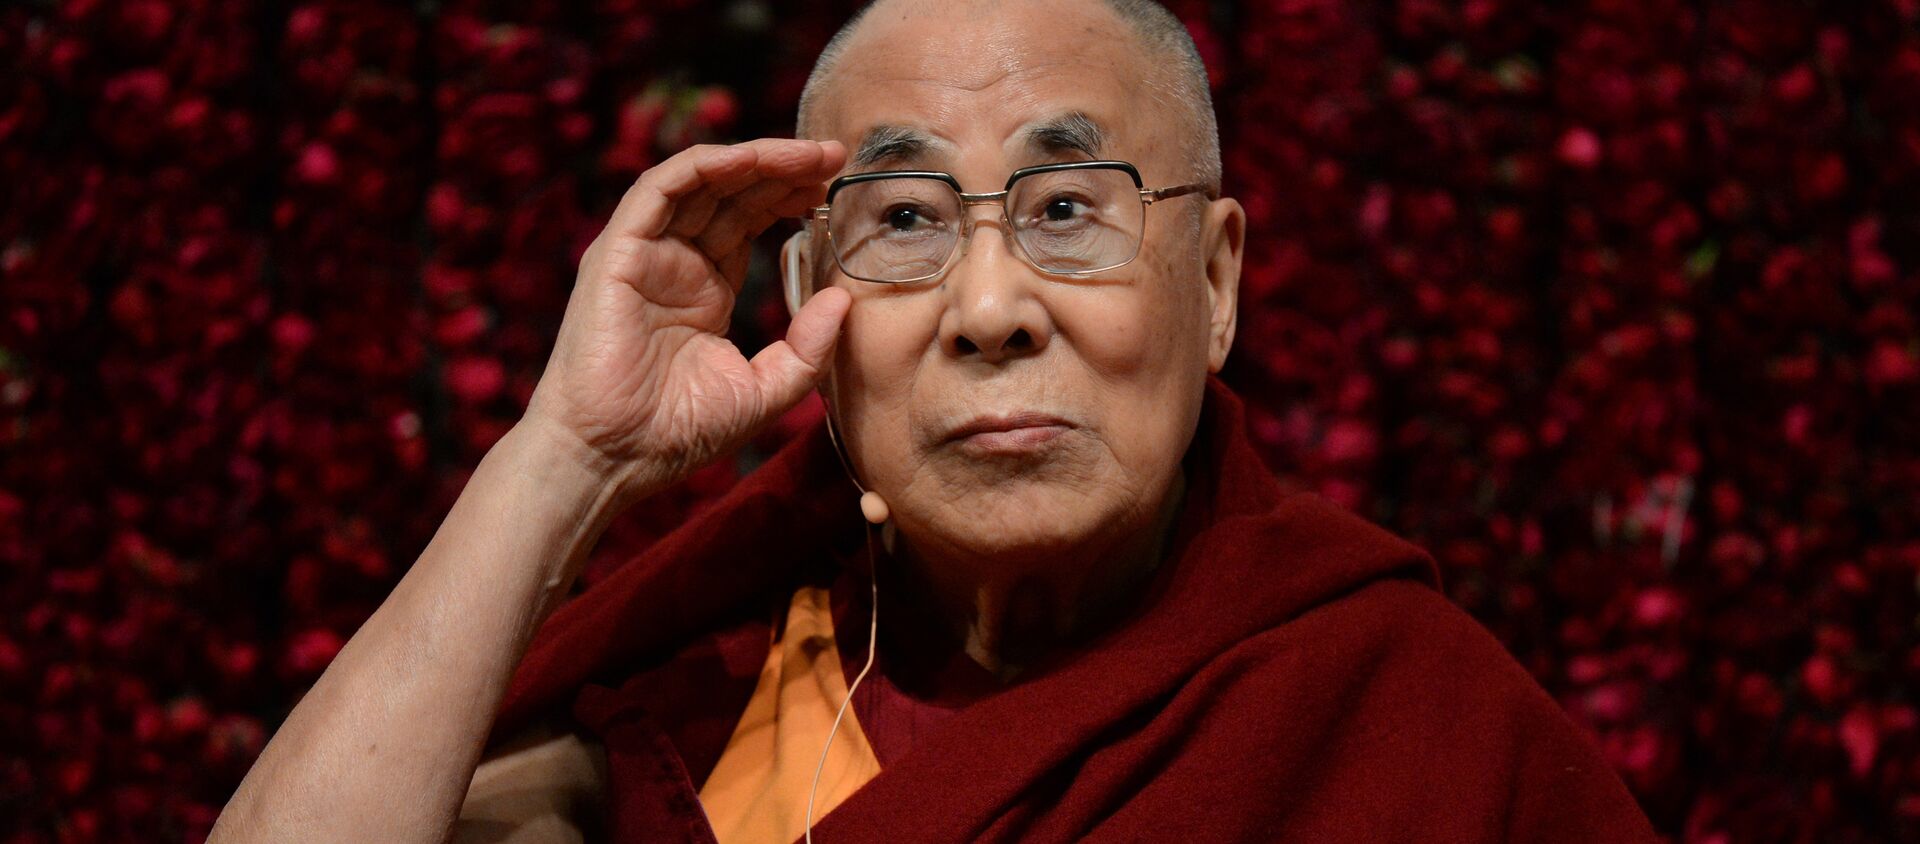 Tibetan spiritual leader, the Dalai Lama, gestures before delivering a public lecture on “Reviving Indian Wisdom in Contemporary India” at a function in New Delhi on February 5, 2017 - Sputnik Việt Nam, 1920, 06.07.2021